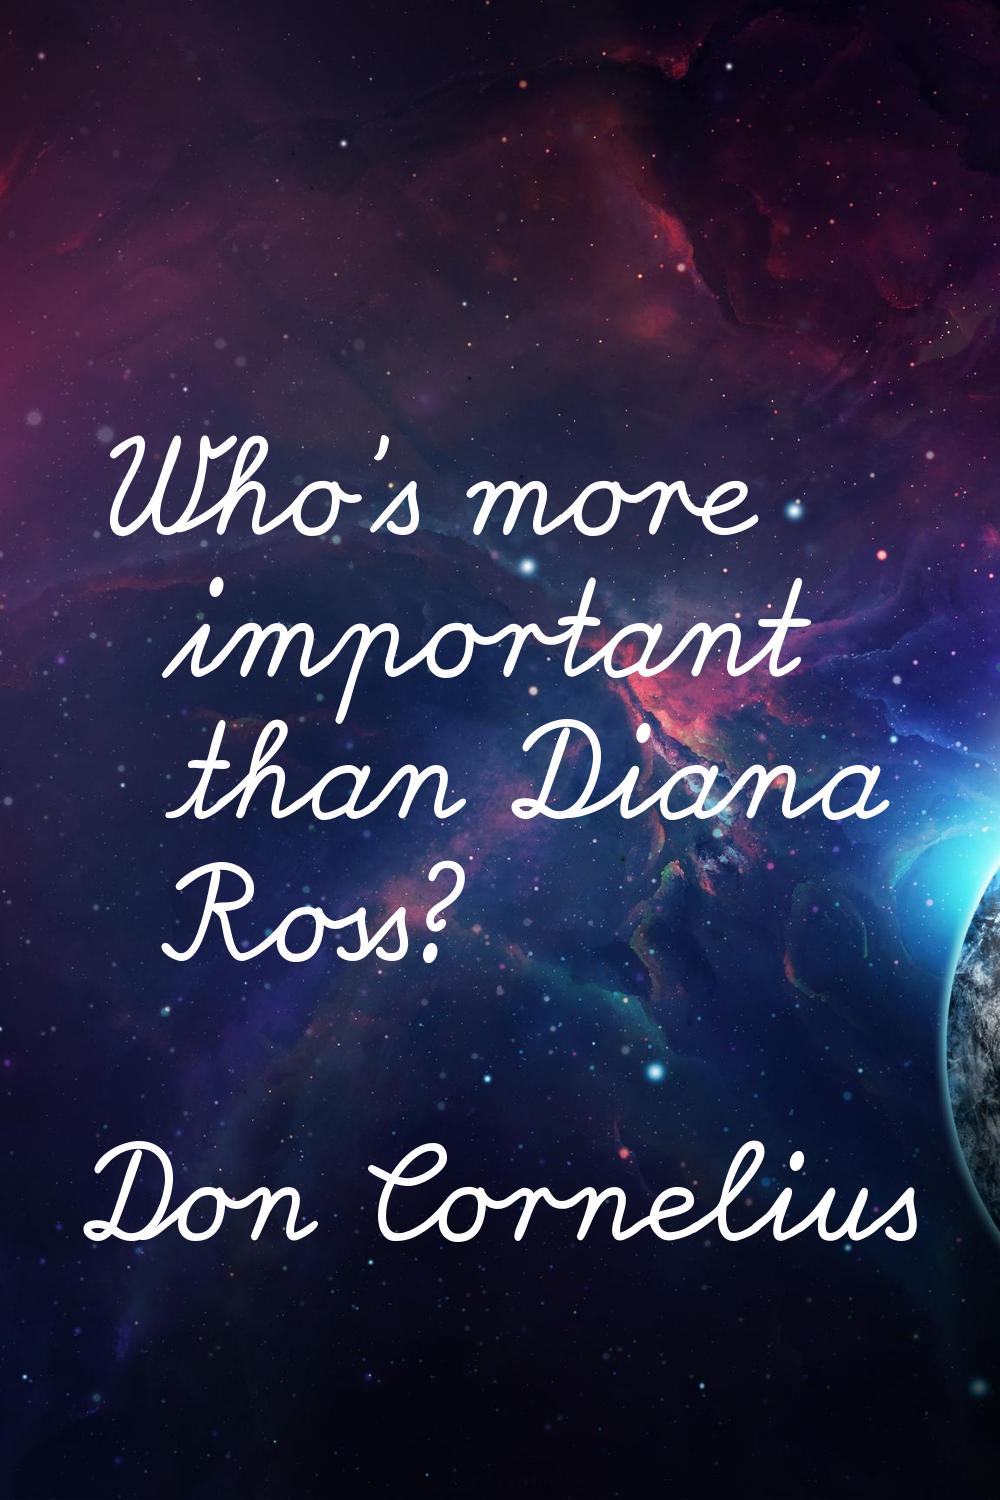 Who's more important than Diana Ross?